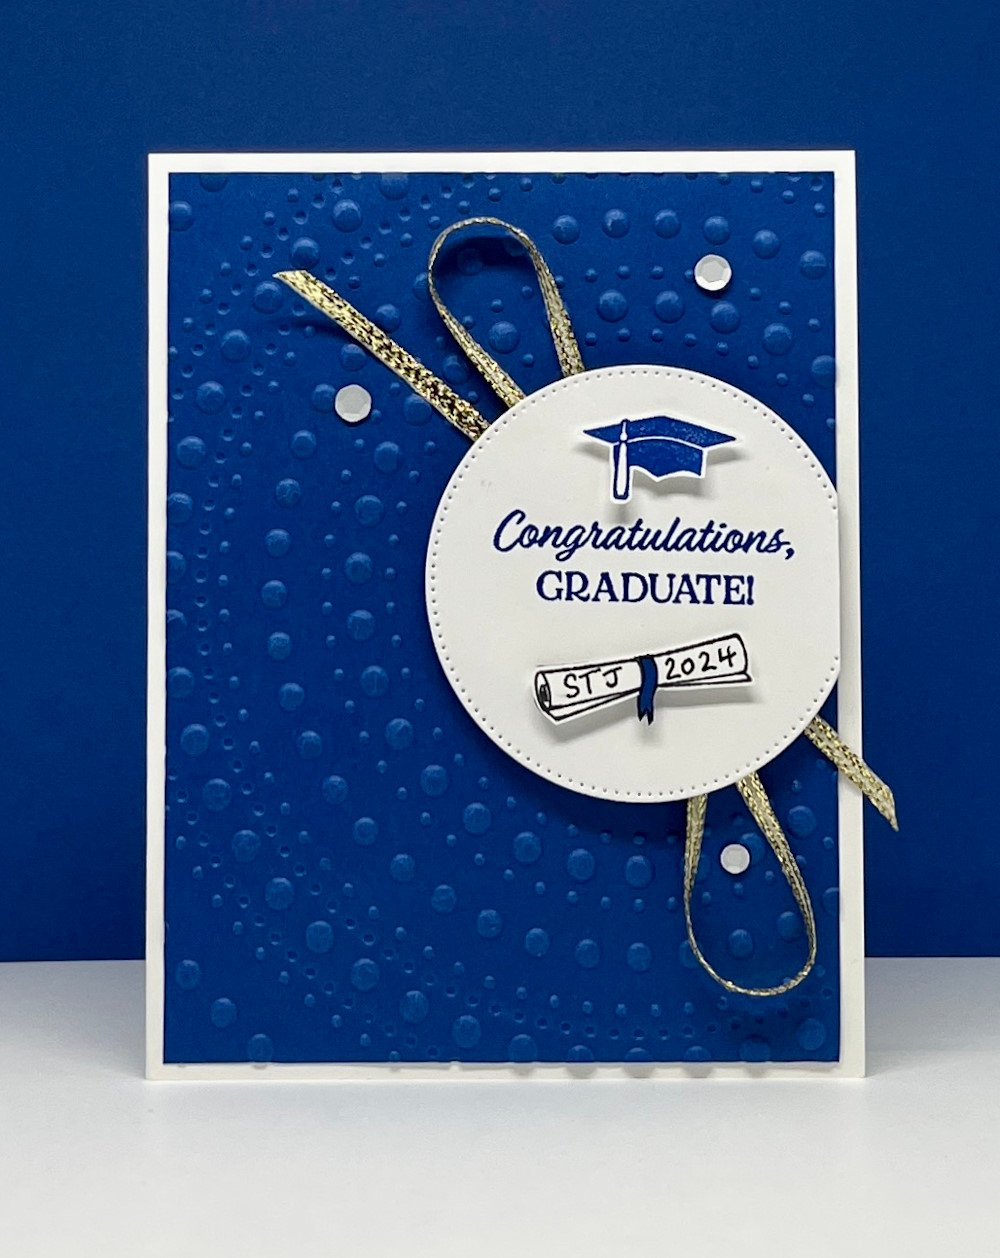 Stampin' Up! graduation card using Cap & Gown stamp set and royal blue background and gold ribbon